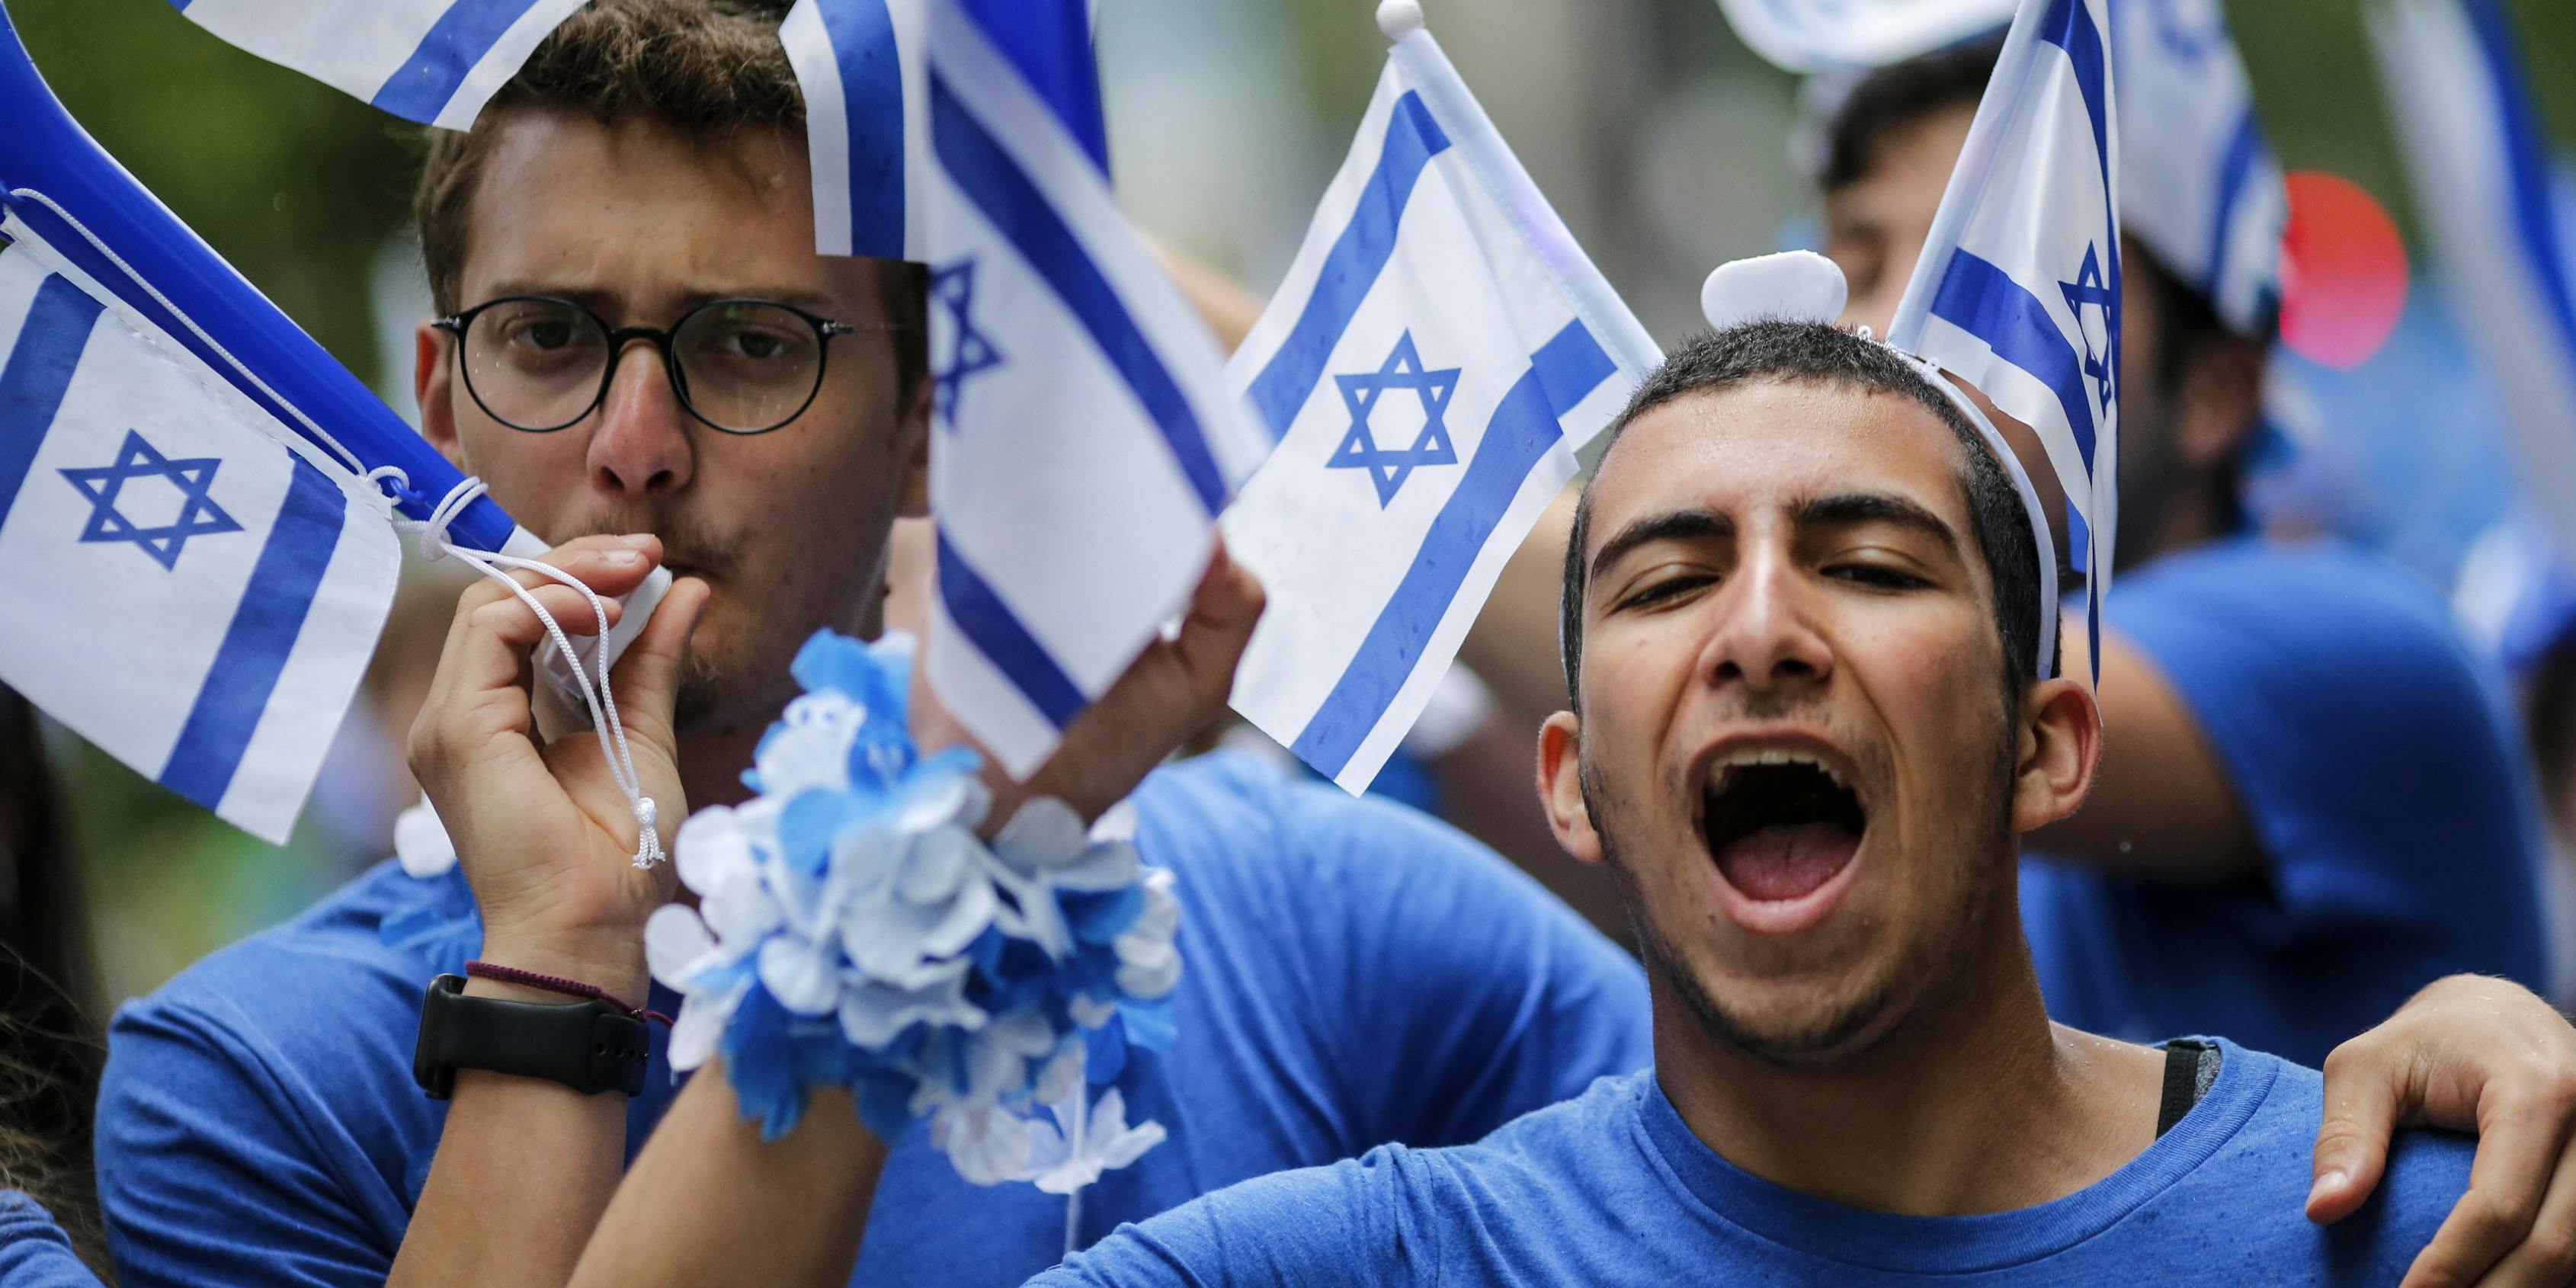 NEW YORK, NY - JUNE 03: People participate in the annual Celebrate Israel Parade on June 3, 2018 in New York City. Security will be tight for the parade which marks the 70th anniversary of the founding of Israel. (Photo by Kena Betancur/Getty Images)